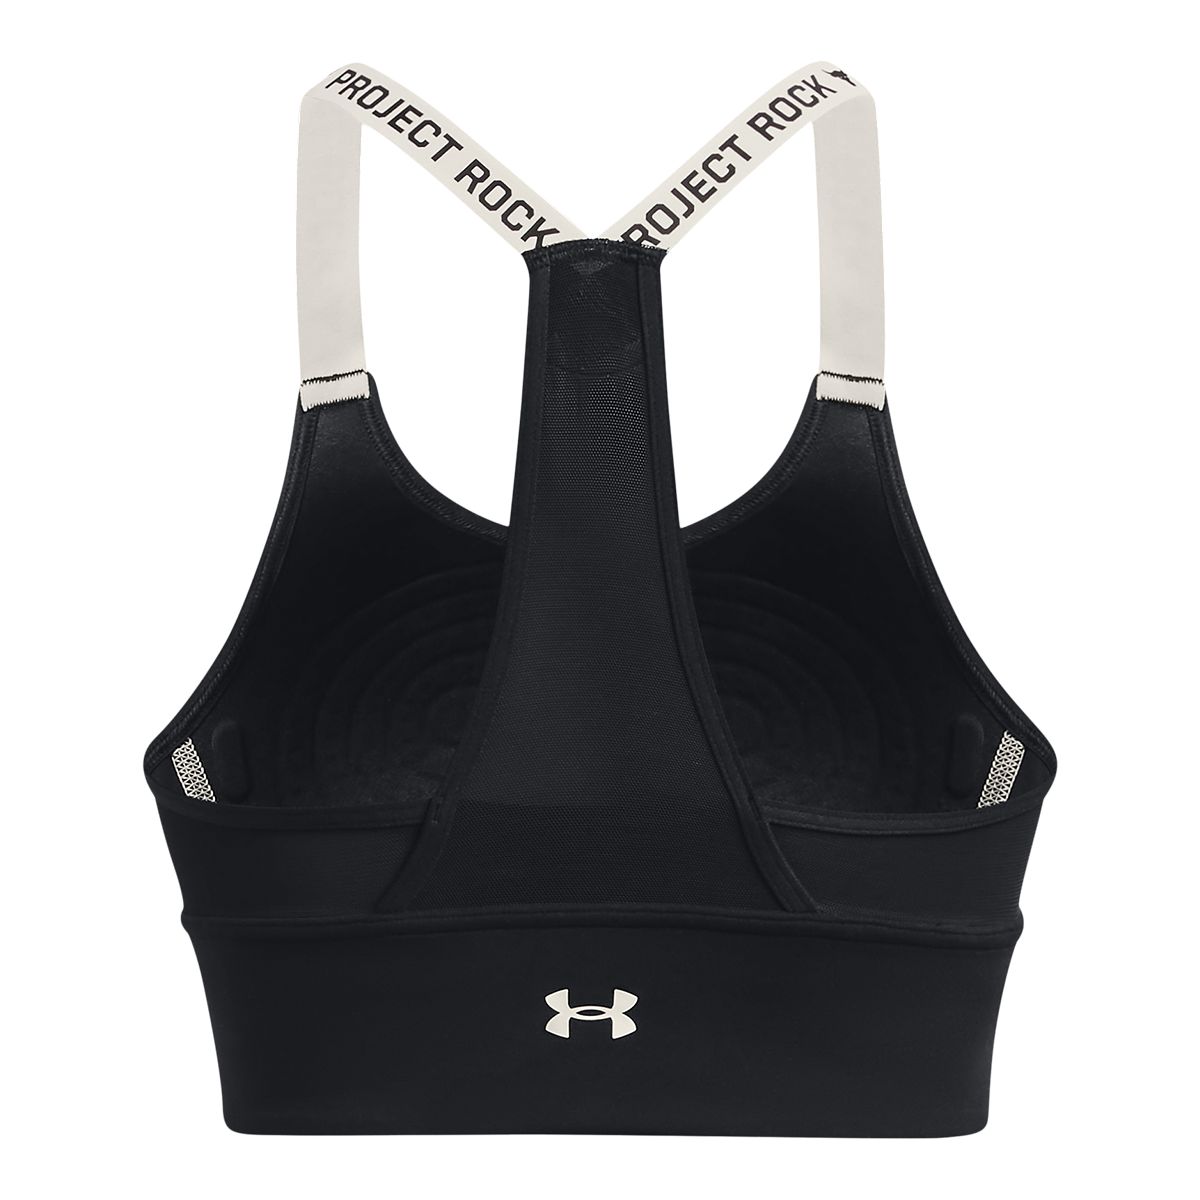 Rockwear - Wear this Sports Bra alone with coordinating tights or under a  singlet or hoodie, this laser cut Sports Bra offer medium to high impact  support and comfort.✨